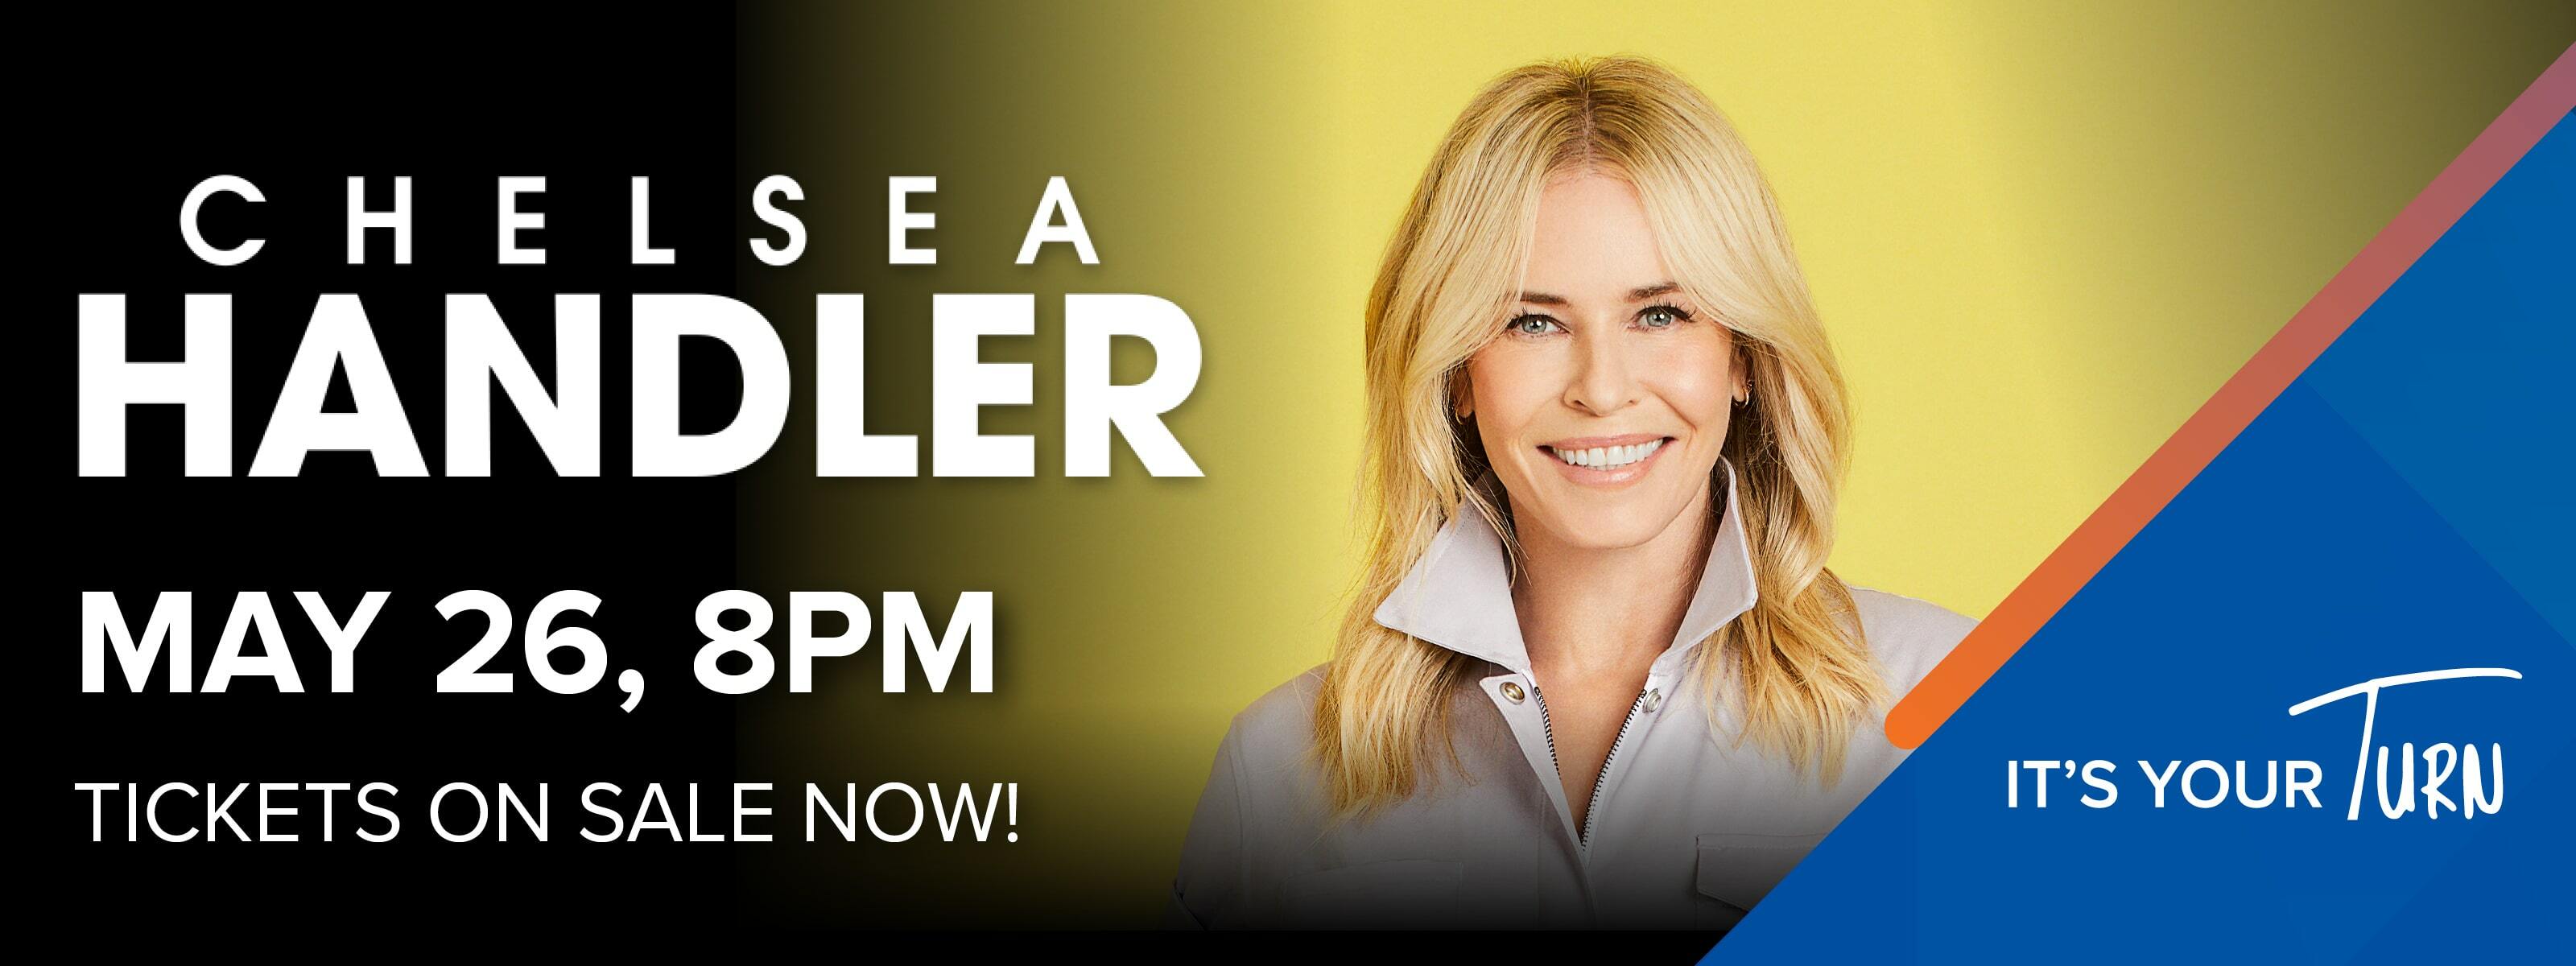 Chelsea Handler May 26 8pm Tickets On Sale Now